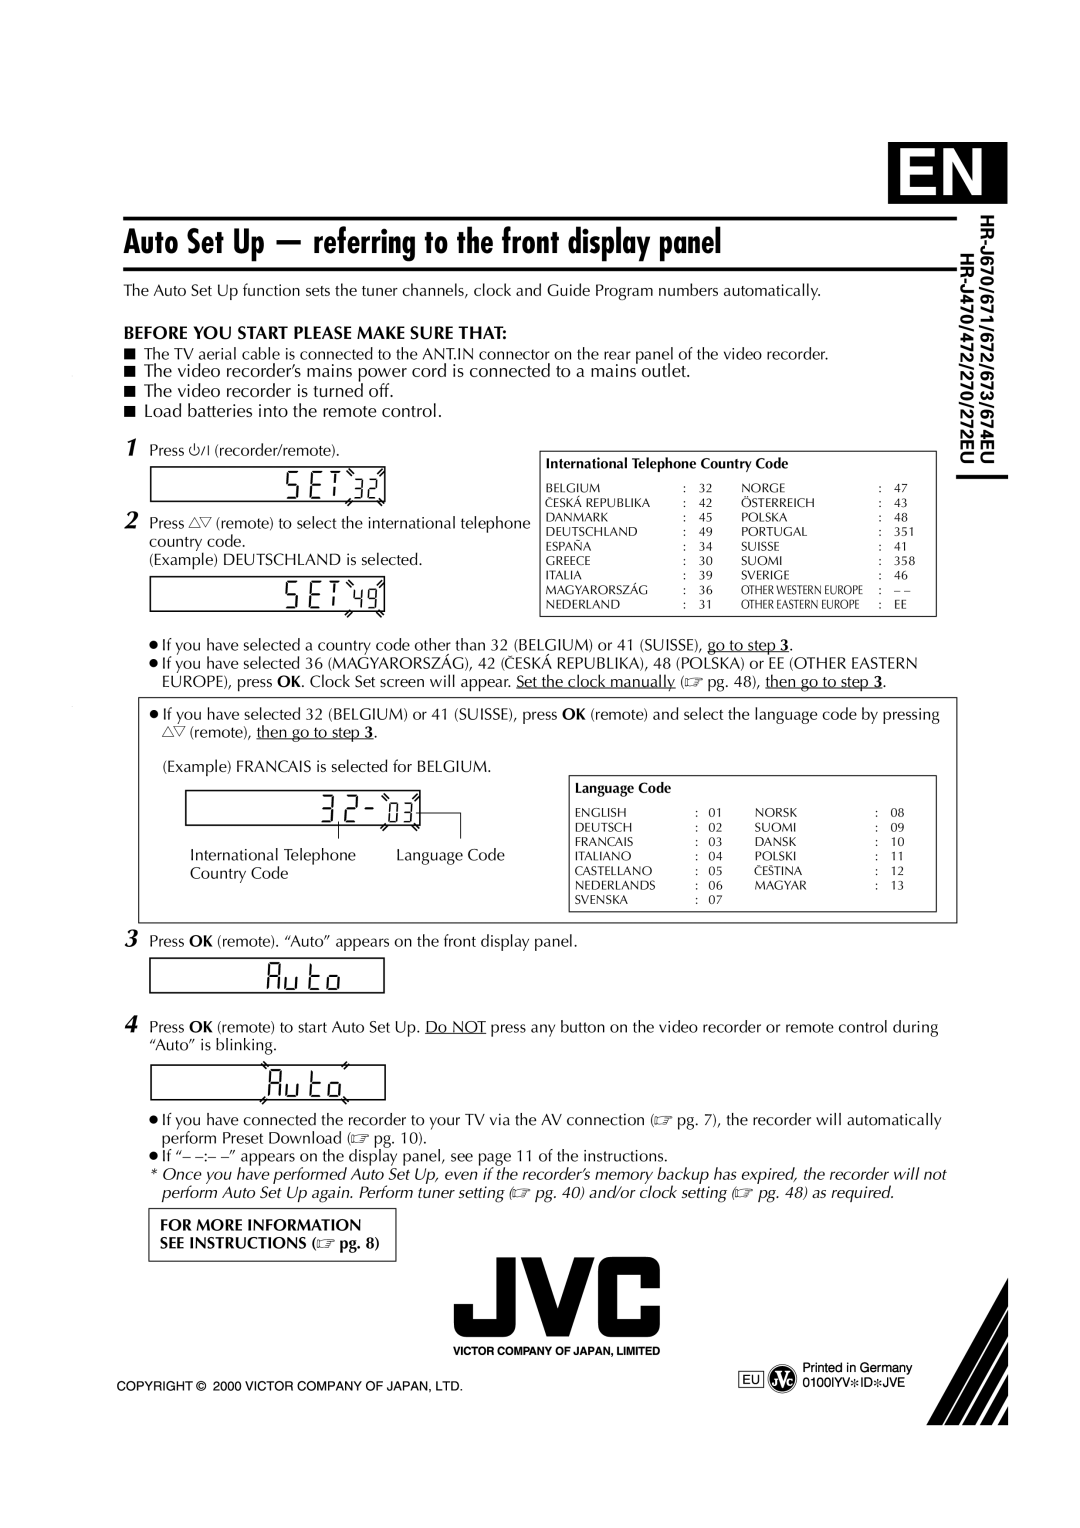 JVC HR-J674EU Auto Set Up - referring to the front display panel, FOR MORE INFORMATION SEE INSTRUCTIONS  pg 